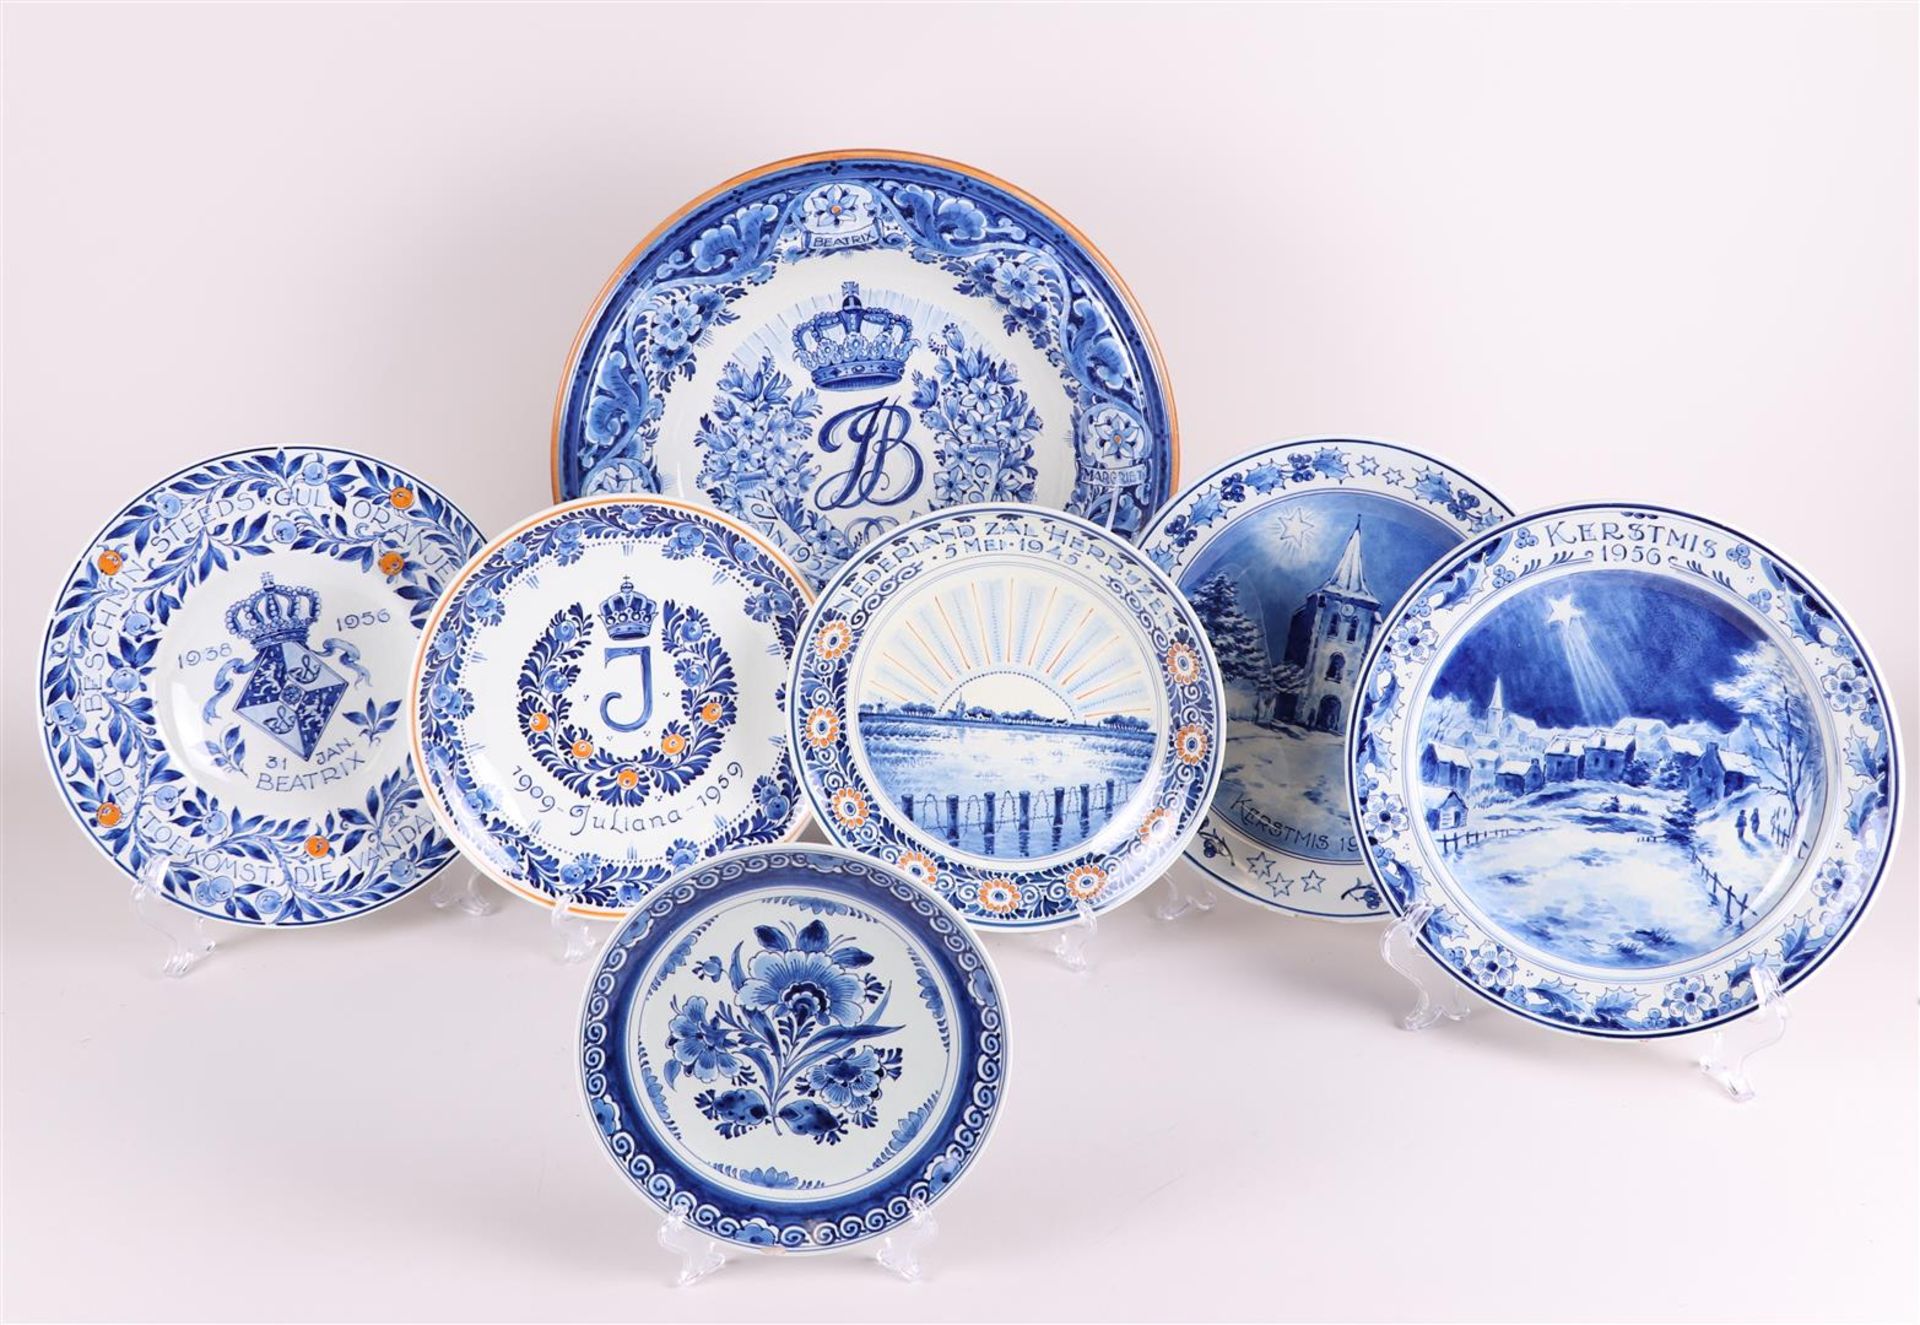 A lot of seven earthenware dishes and plates, all marked "De Porcleyne Fles".